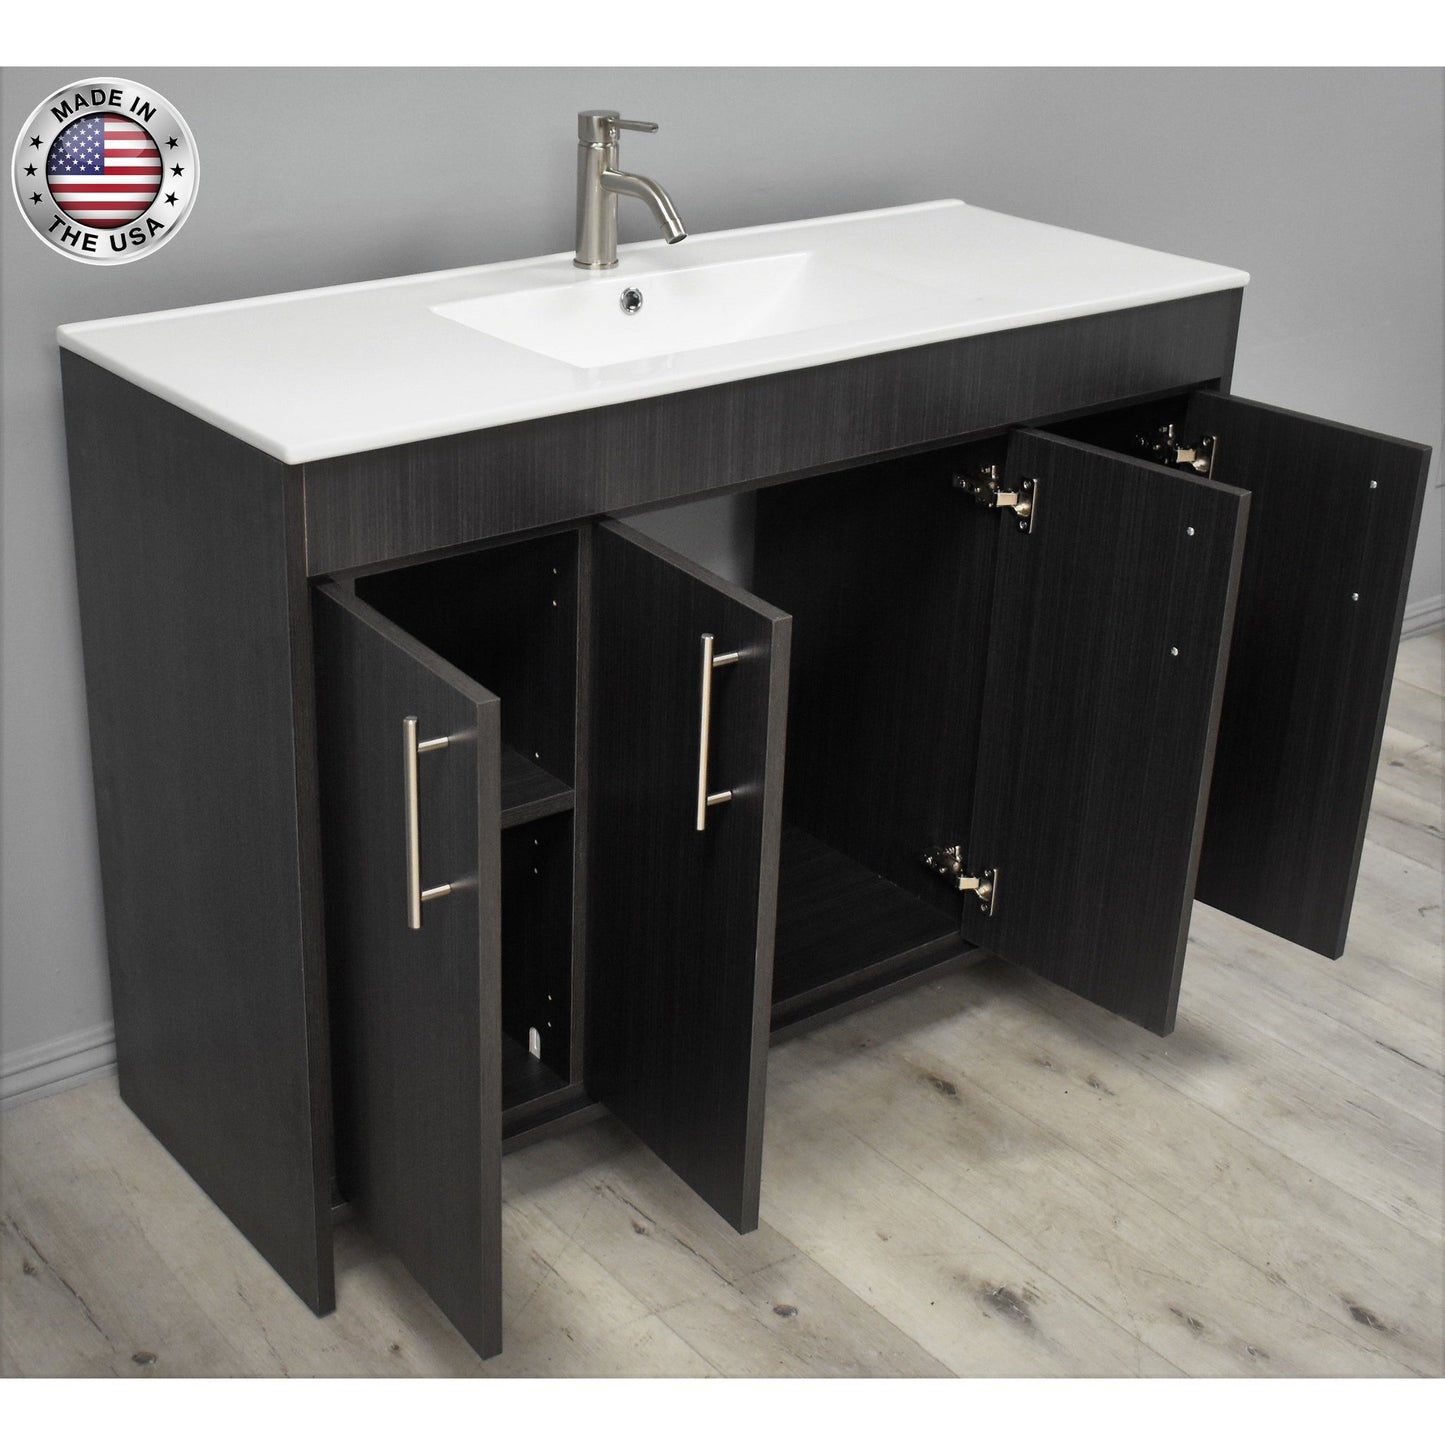 Volpa USA Villa 48" Black Ash Freestanding Modern Bathroom Vanity With Integrated Ceramic Top and Brushed Nickel Round Handles